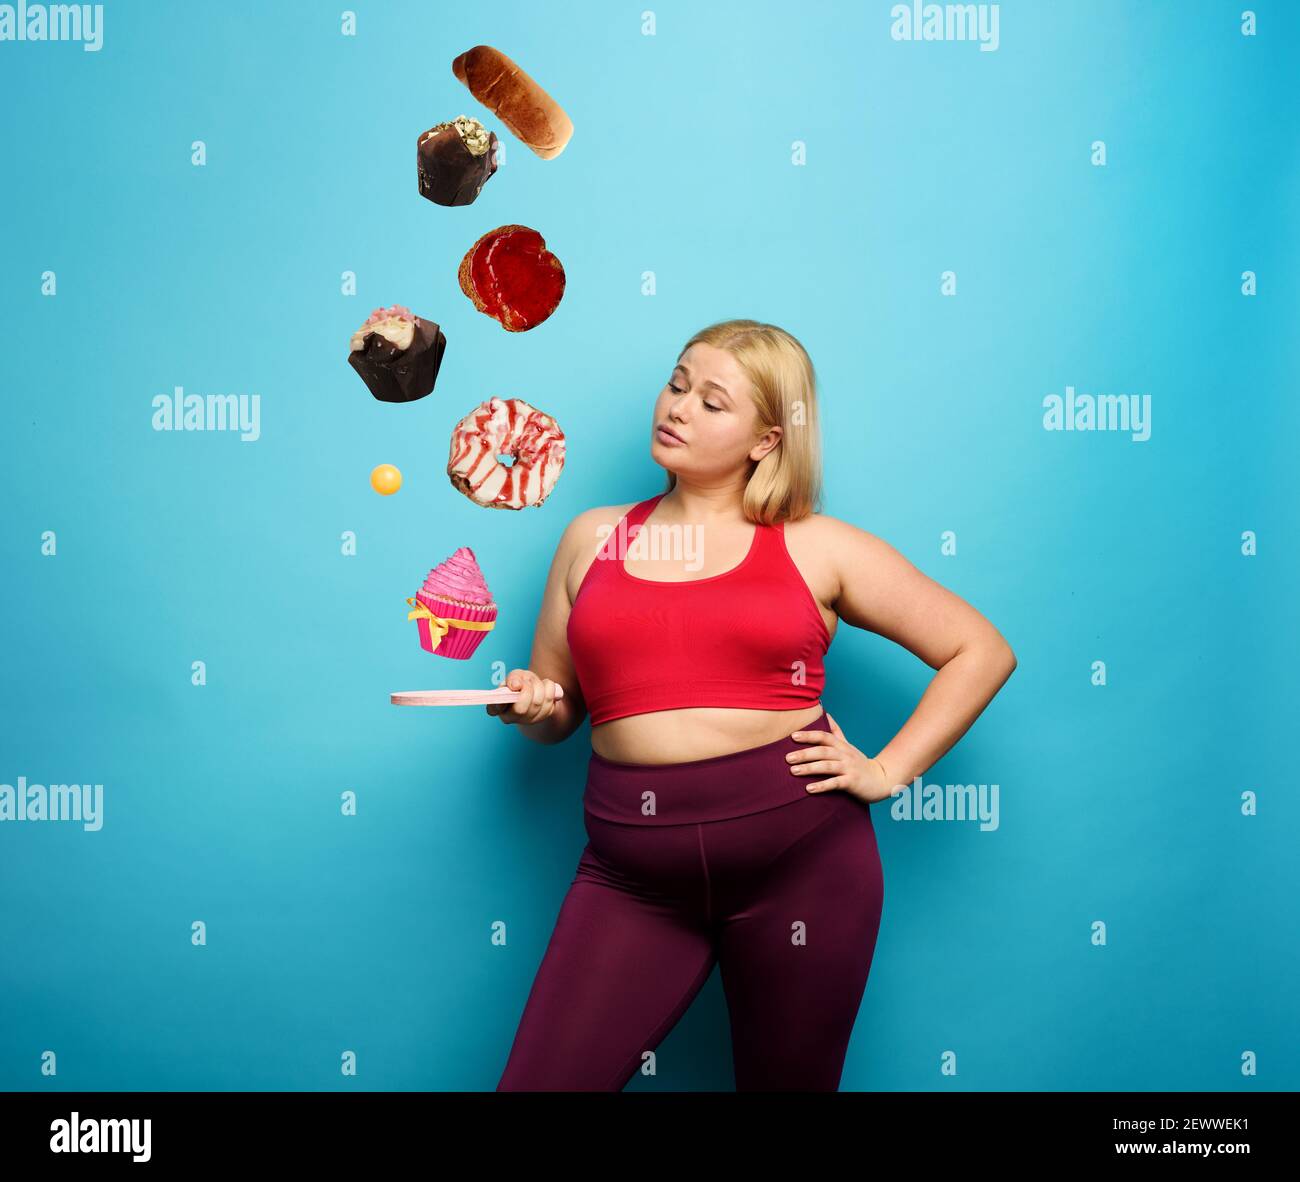 Fat girl tries to play with table tennis but thinks always to eat. Cyan background Stock Photo